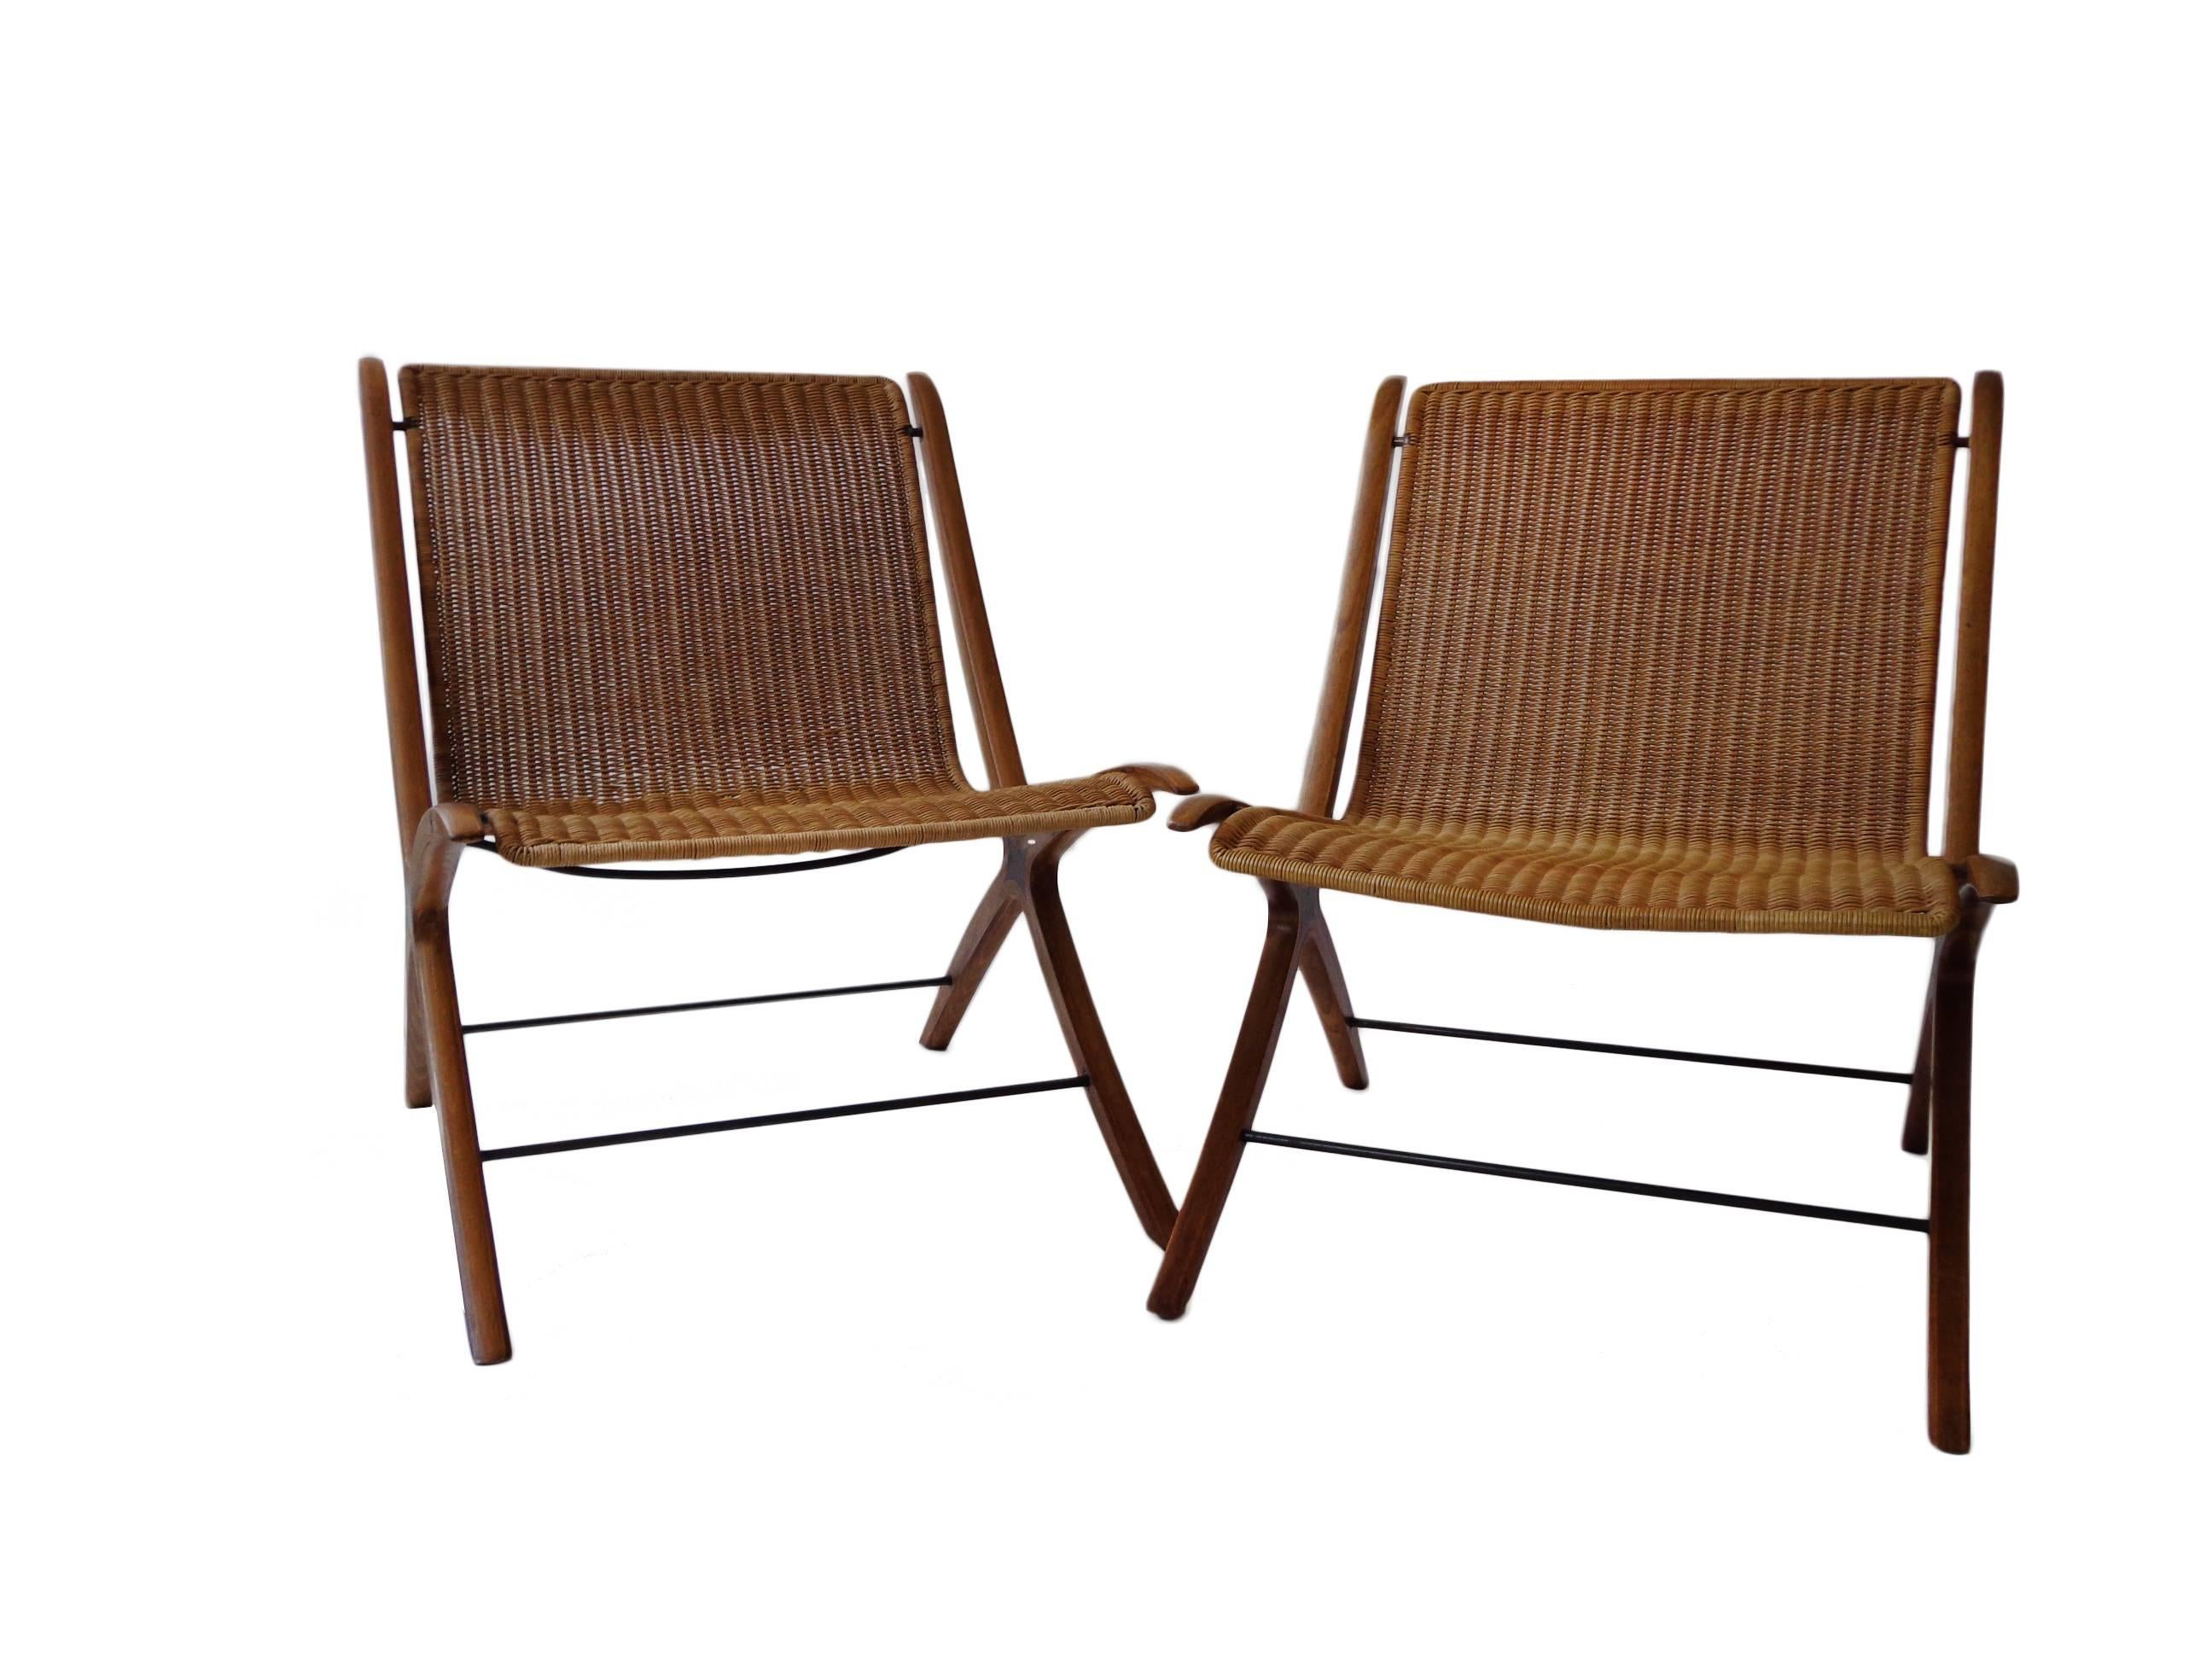 Offerd by Zitzo, Amsterdam: A pair of teak-cane lounge Chair by Peter Hvidt & Orla Mølgaard Nielsen for Fritz Hansen. Model 6103 or 